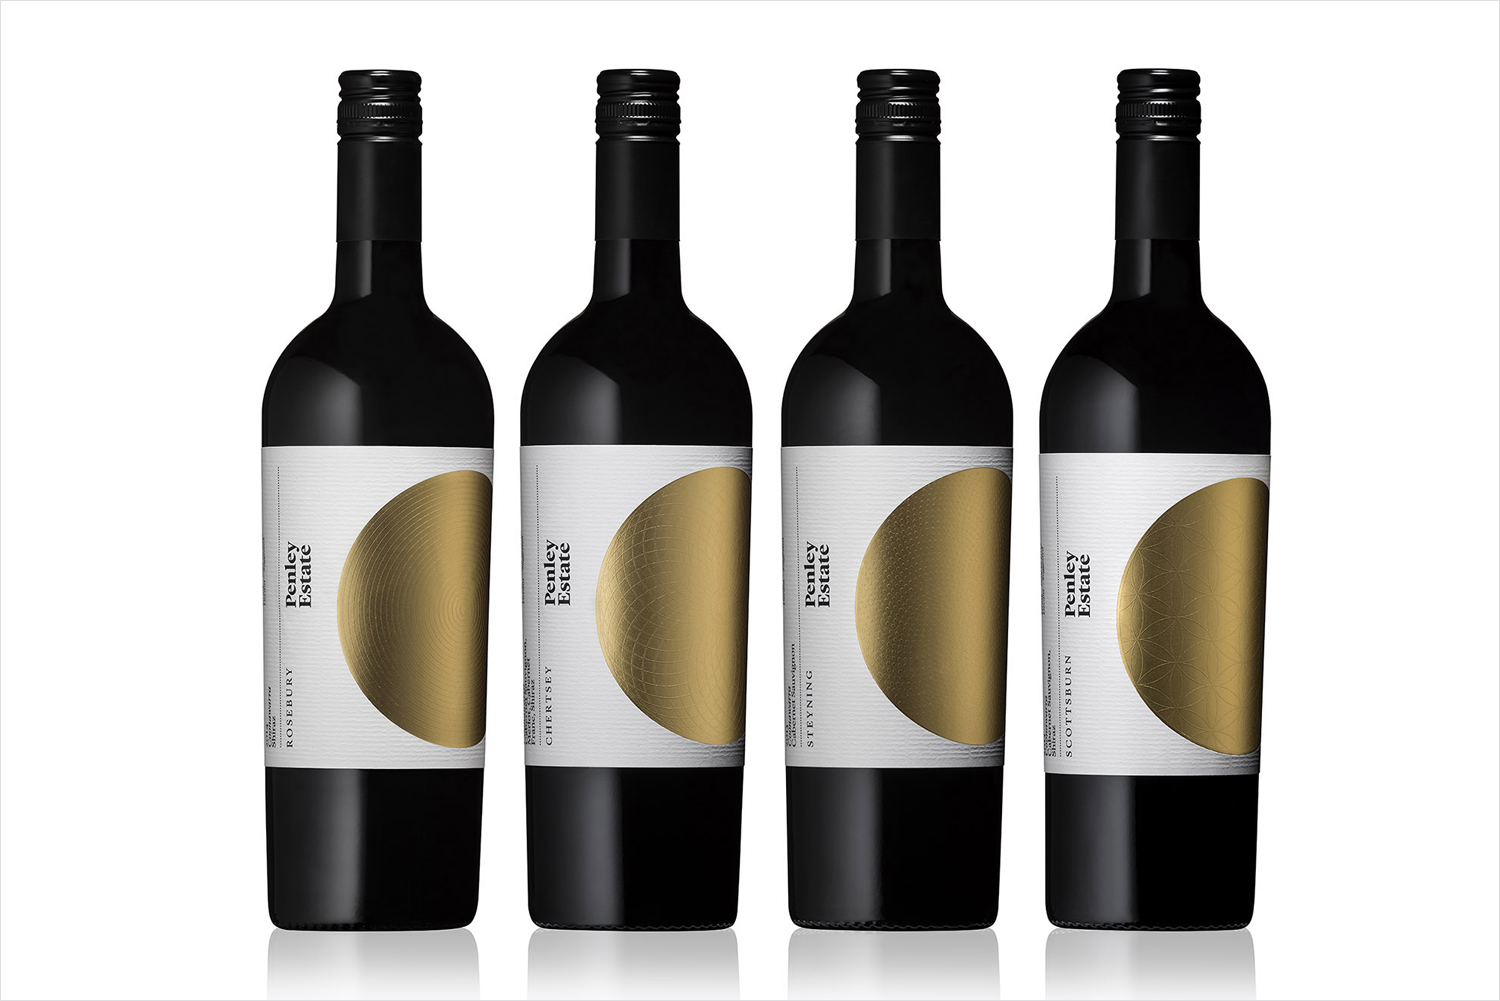 New brand identity and packaging by Parallax Design for family run and award winning winery Penley Estate, Australia